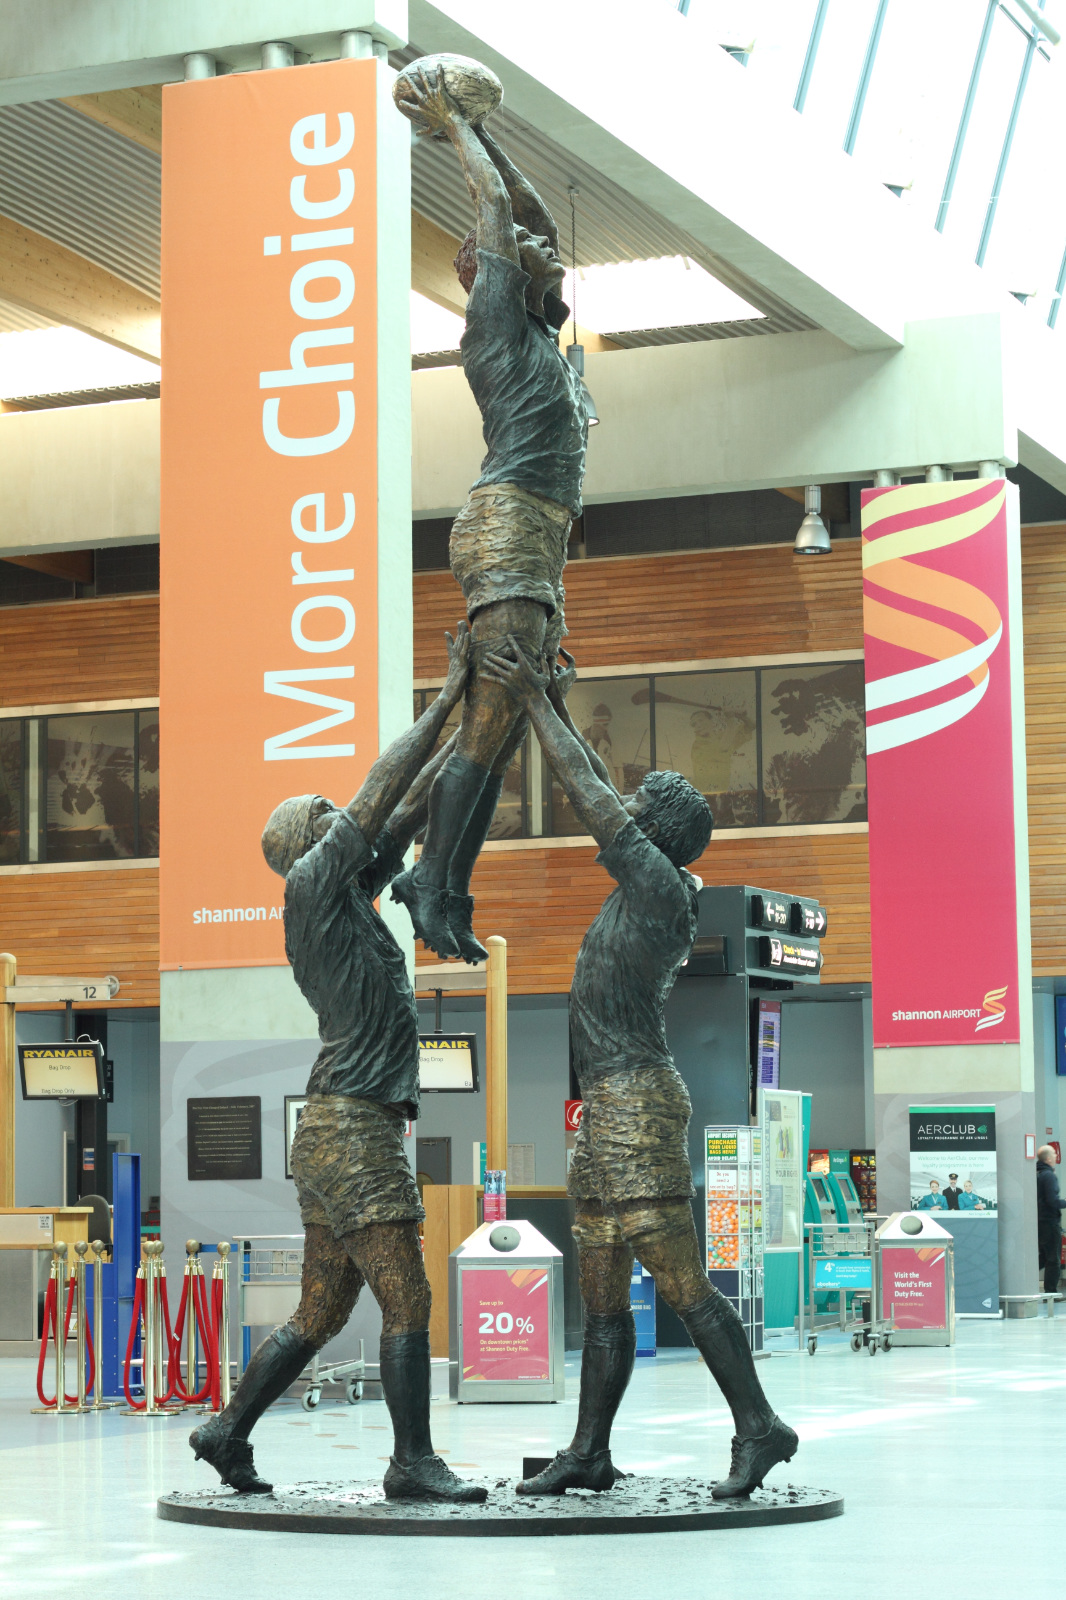 2015 “The Day That Changed Ireland”,Rugby sculpture at Shannon Airport, Ireland